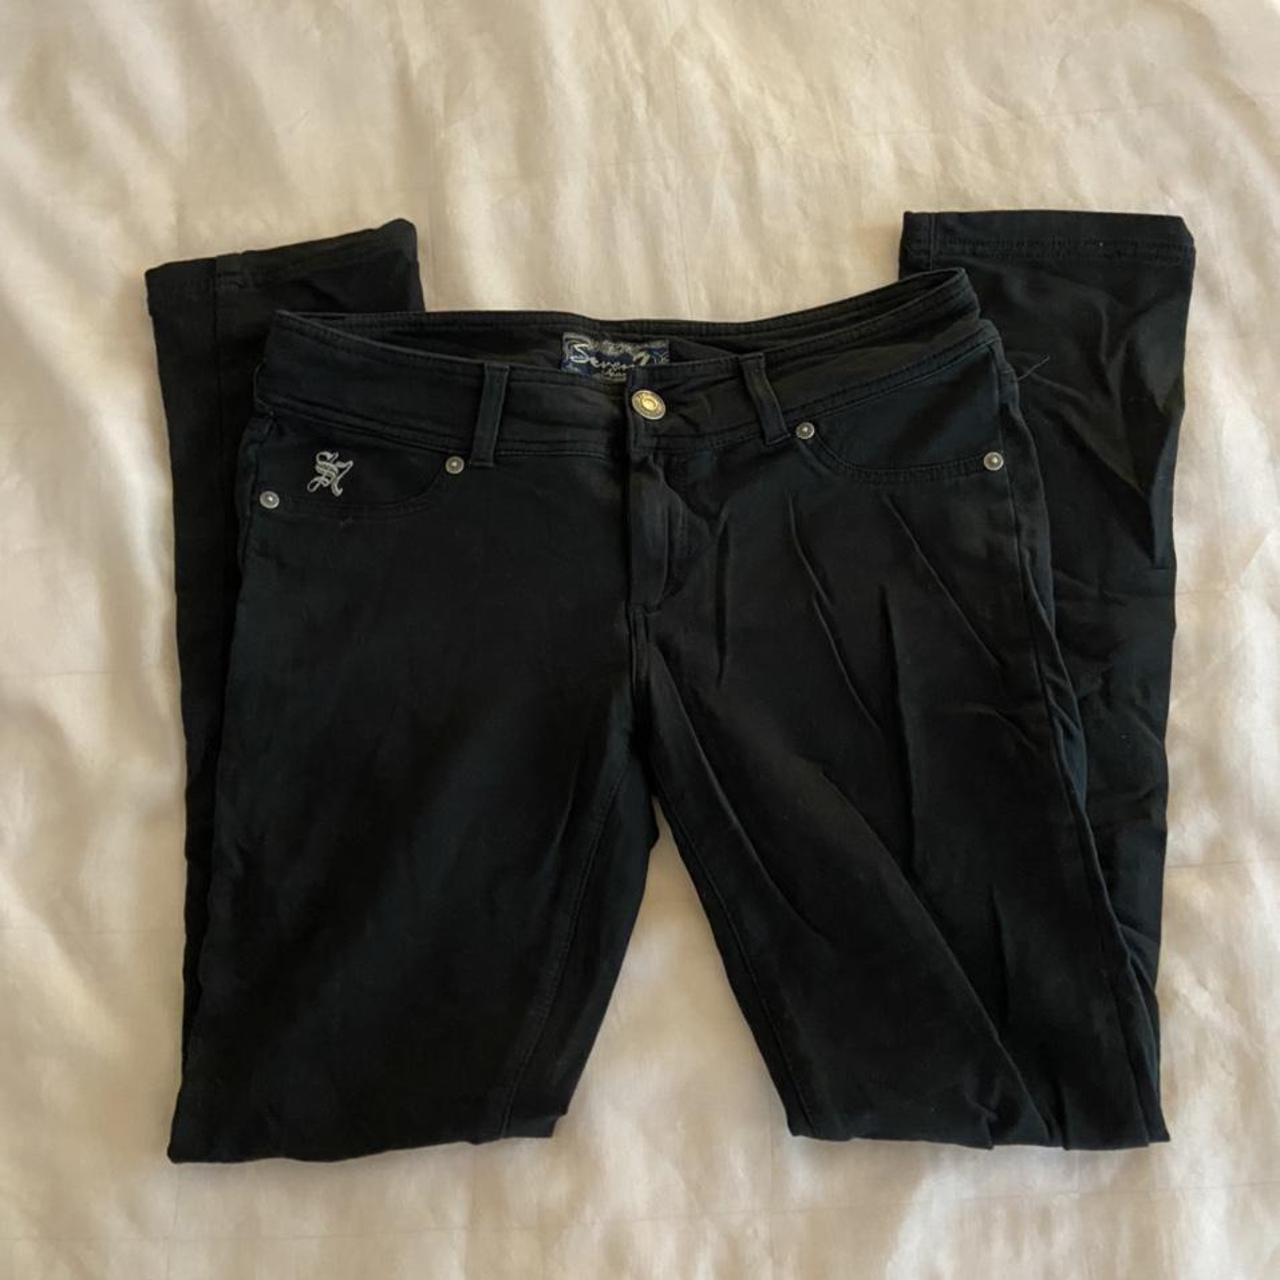 Product Image 1 - Black Y2K Jeggings

In great condition